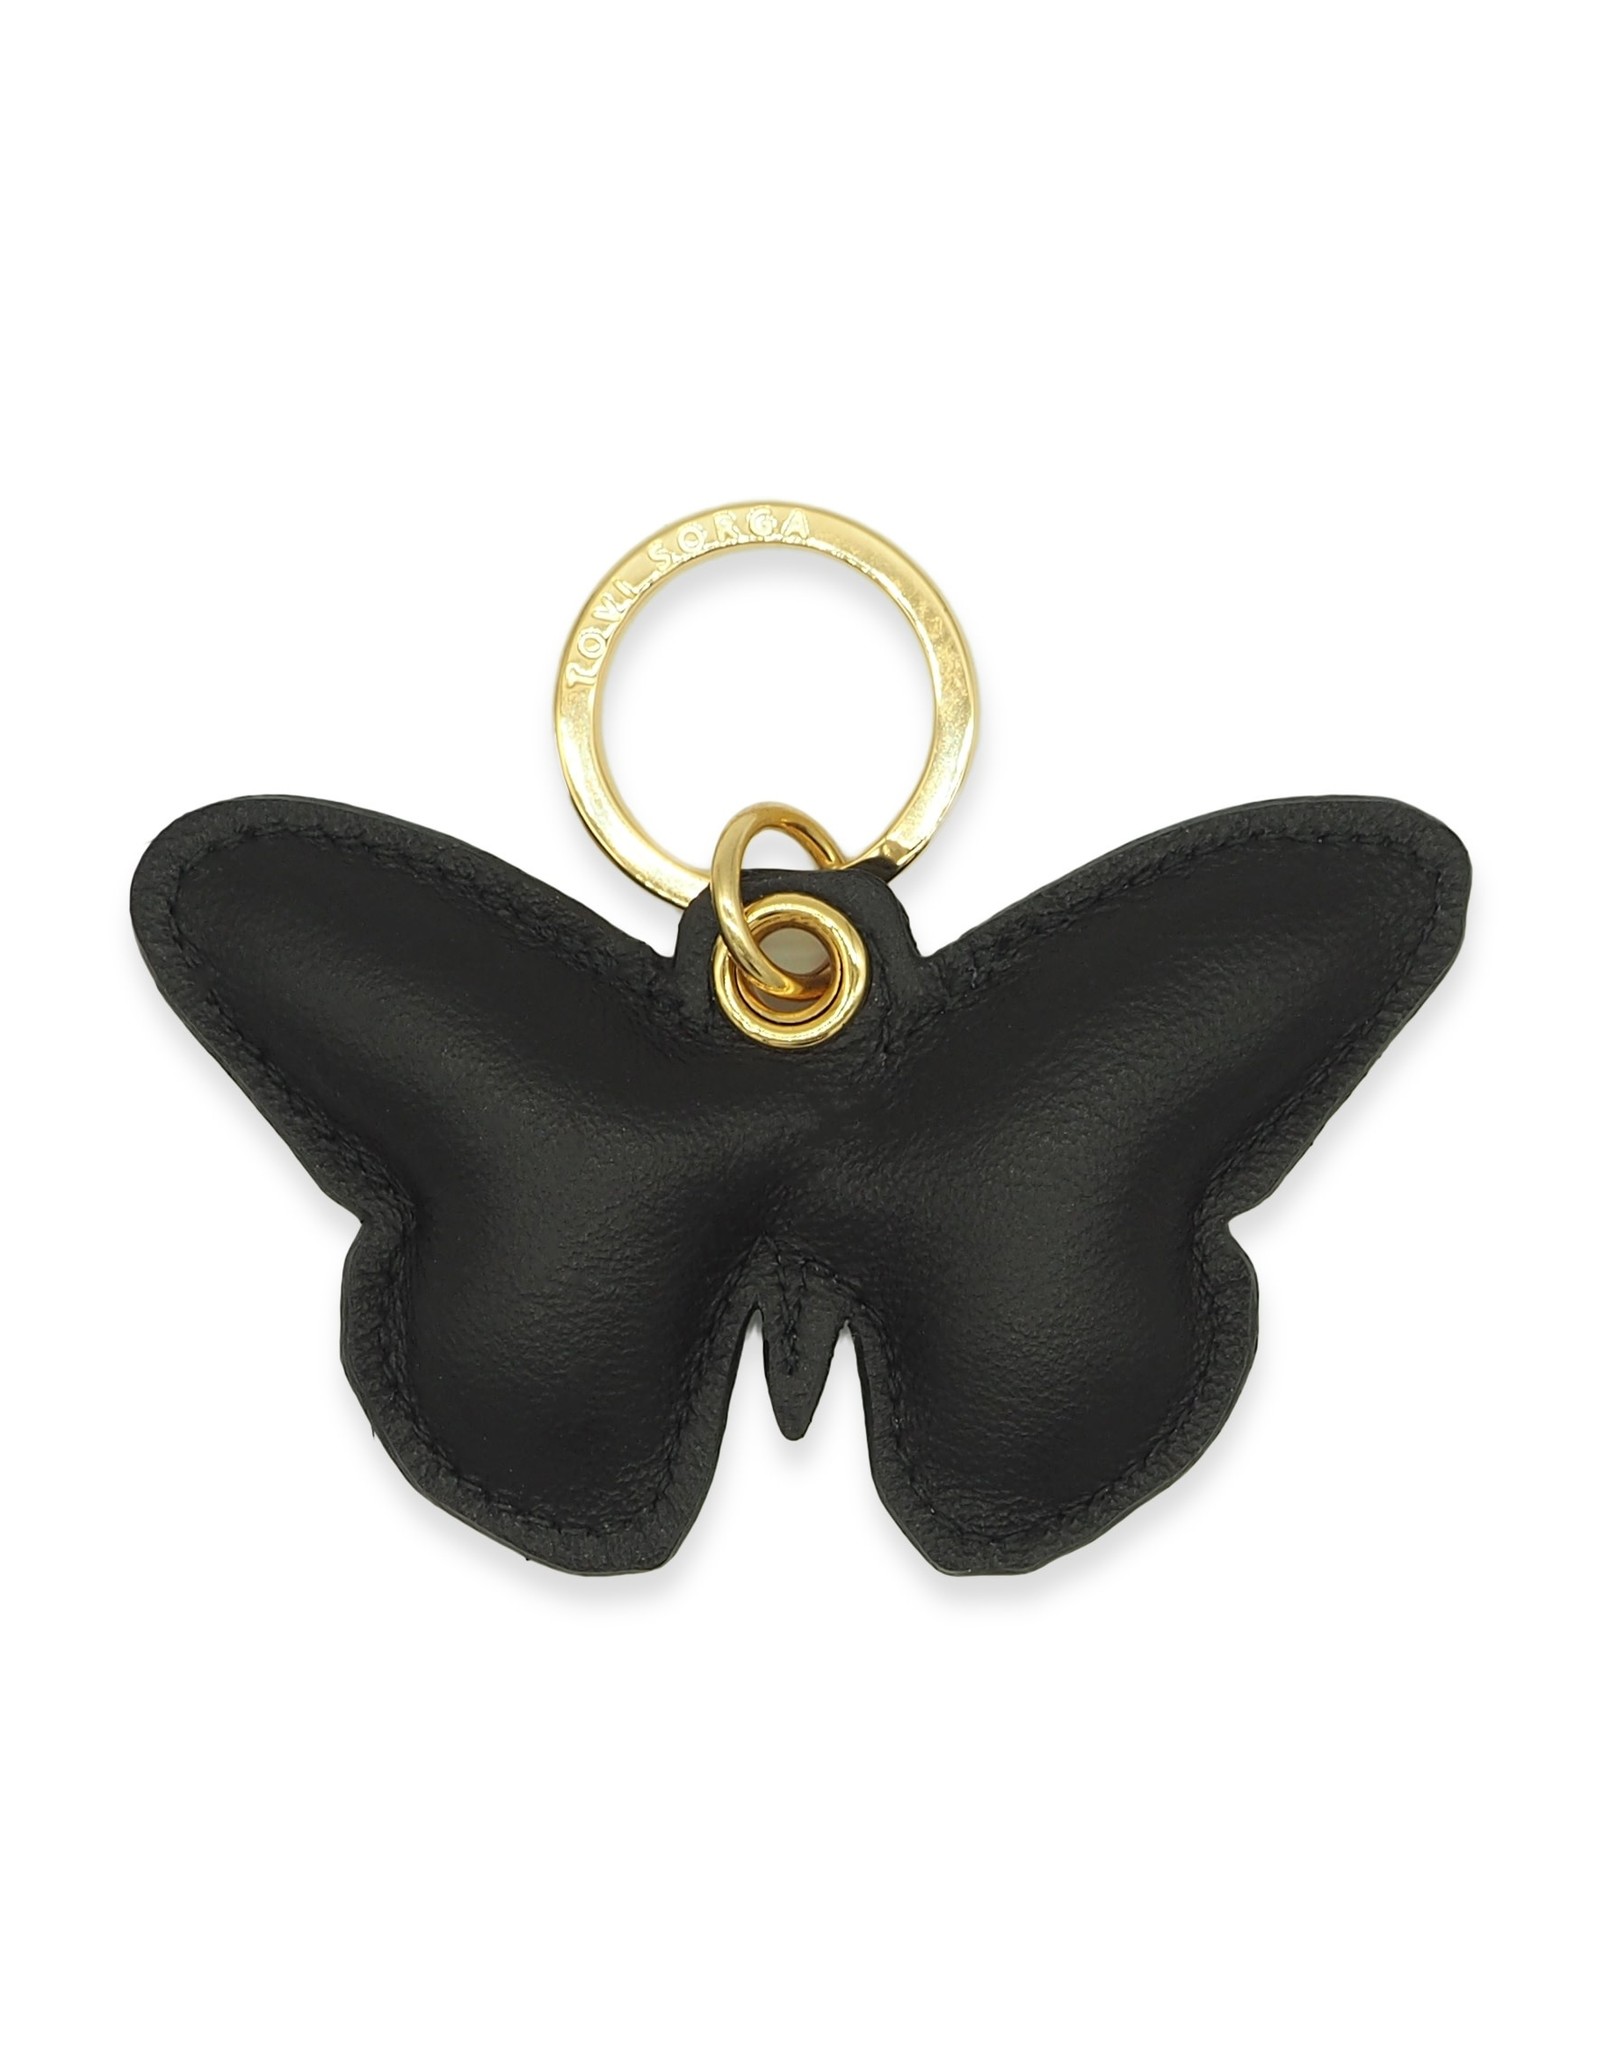 Monarch Butterfly Key Ring - Printed Genuine Leather